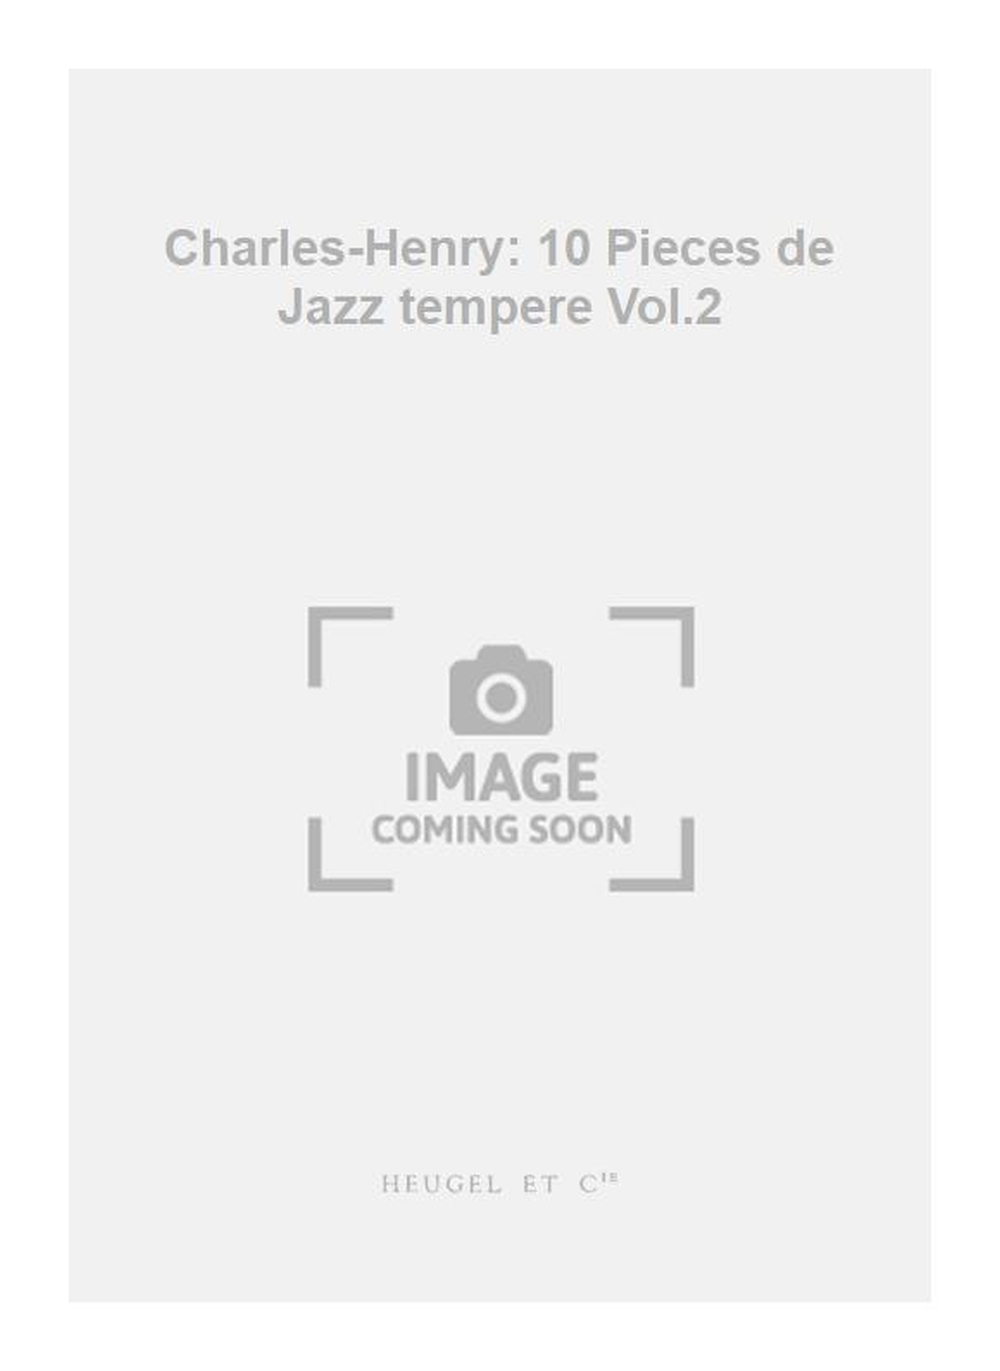 Charles-Henry Boite: Charles-Henry: 10 Pieces de Jazz tempere Vol.2